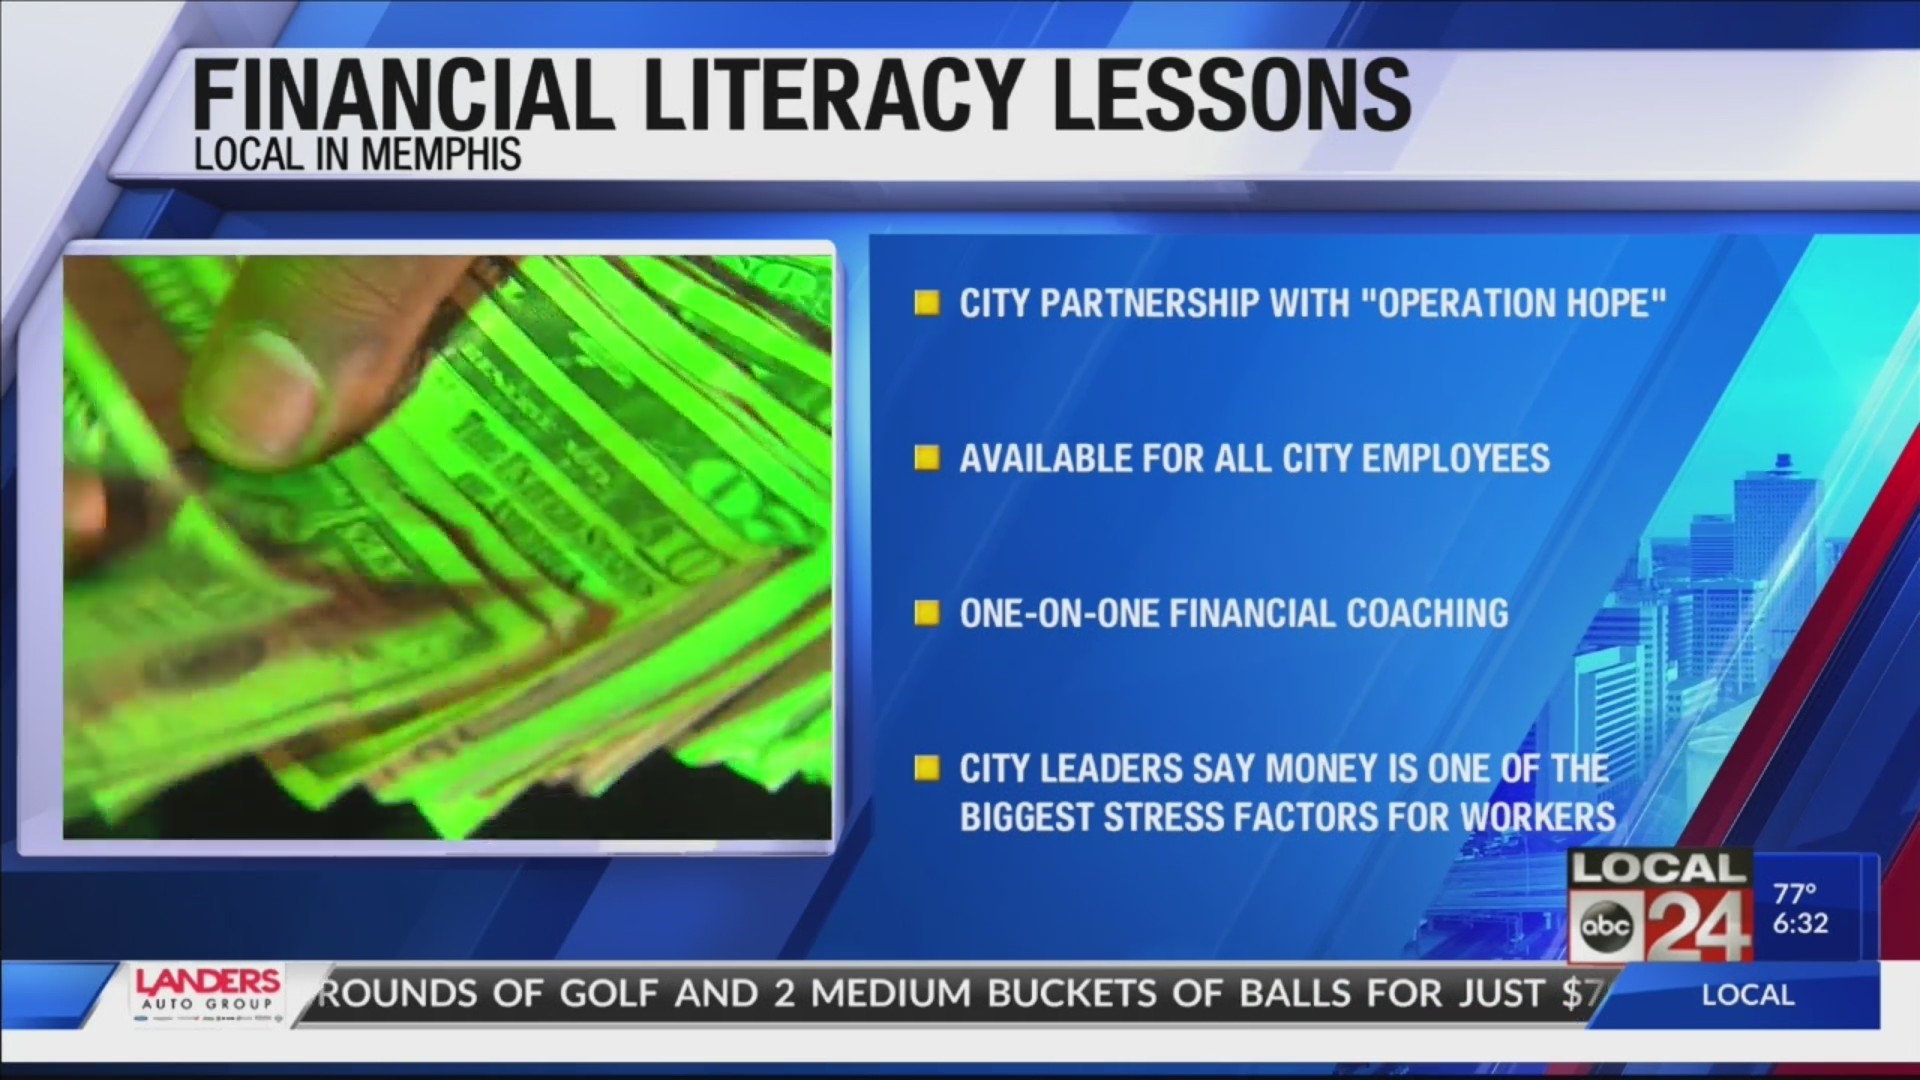 City of Memphis Financial Literacy, Operation HOPE